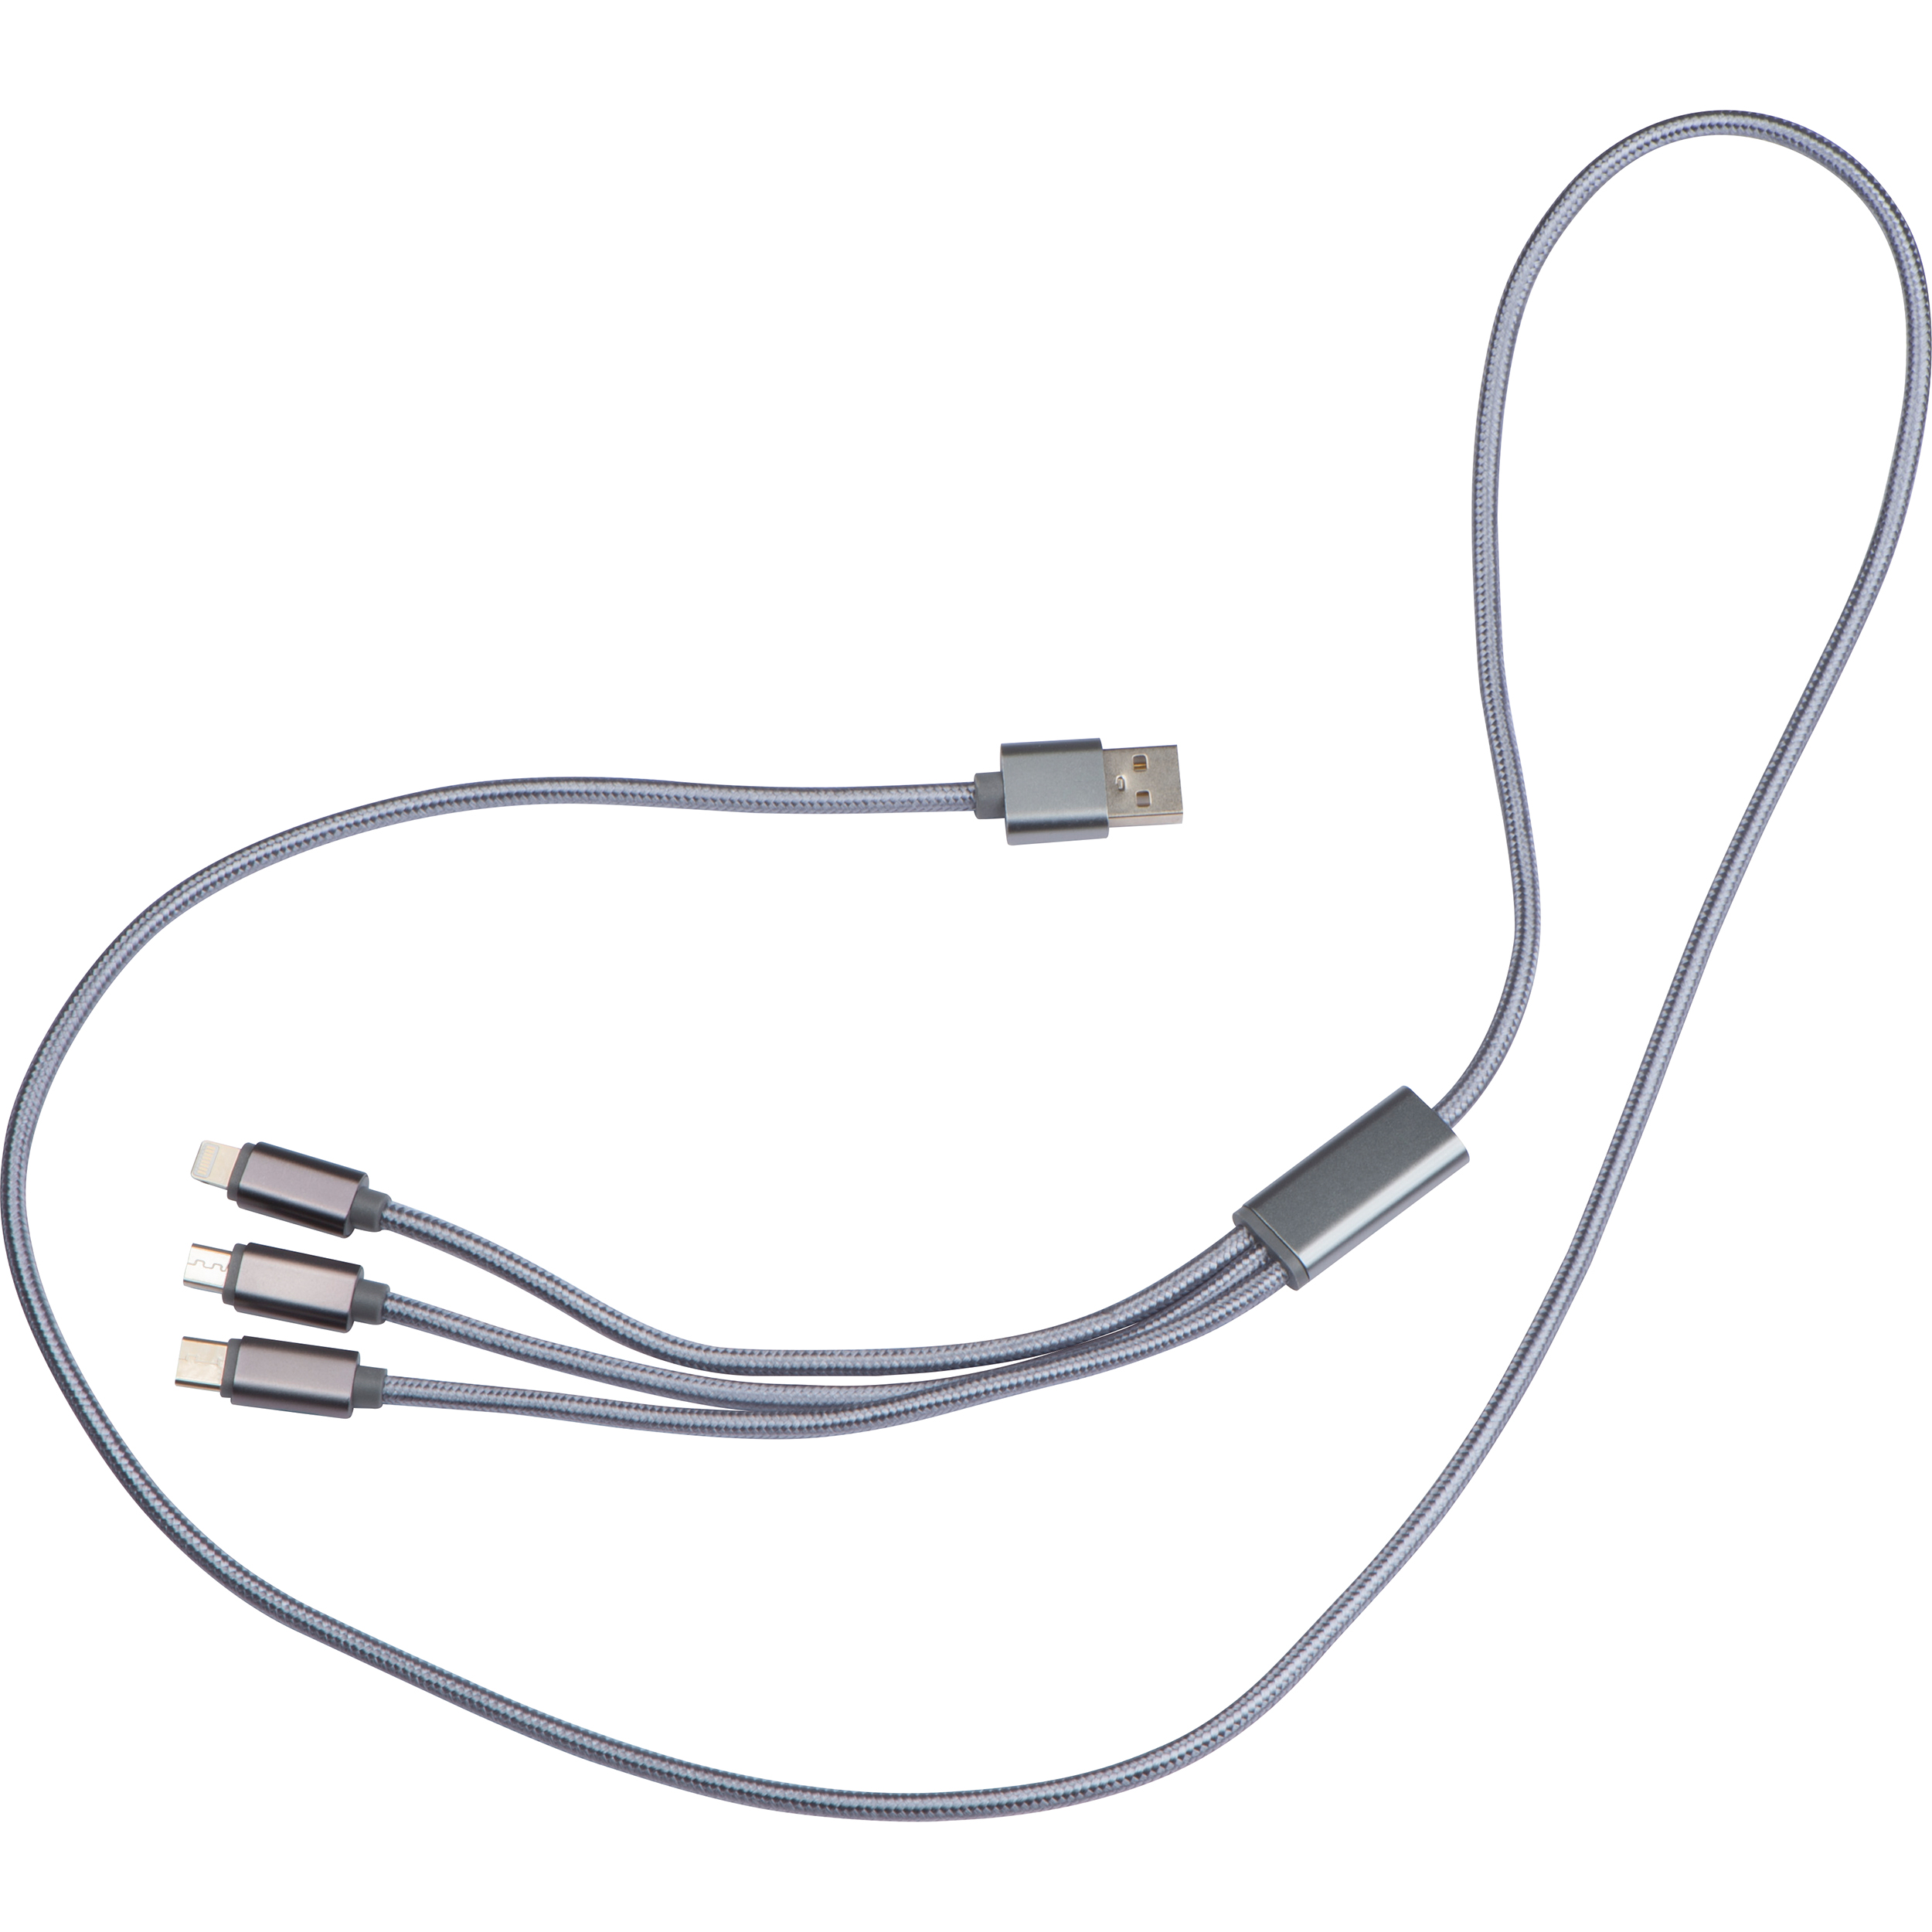 Extralong charging cable, USB, Micro-USB, C-Type and light